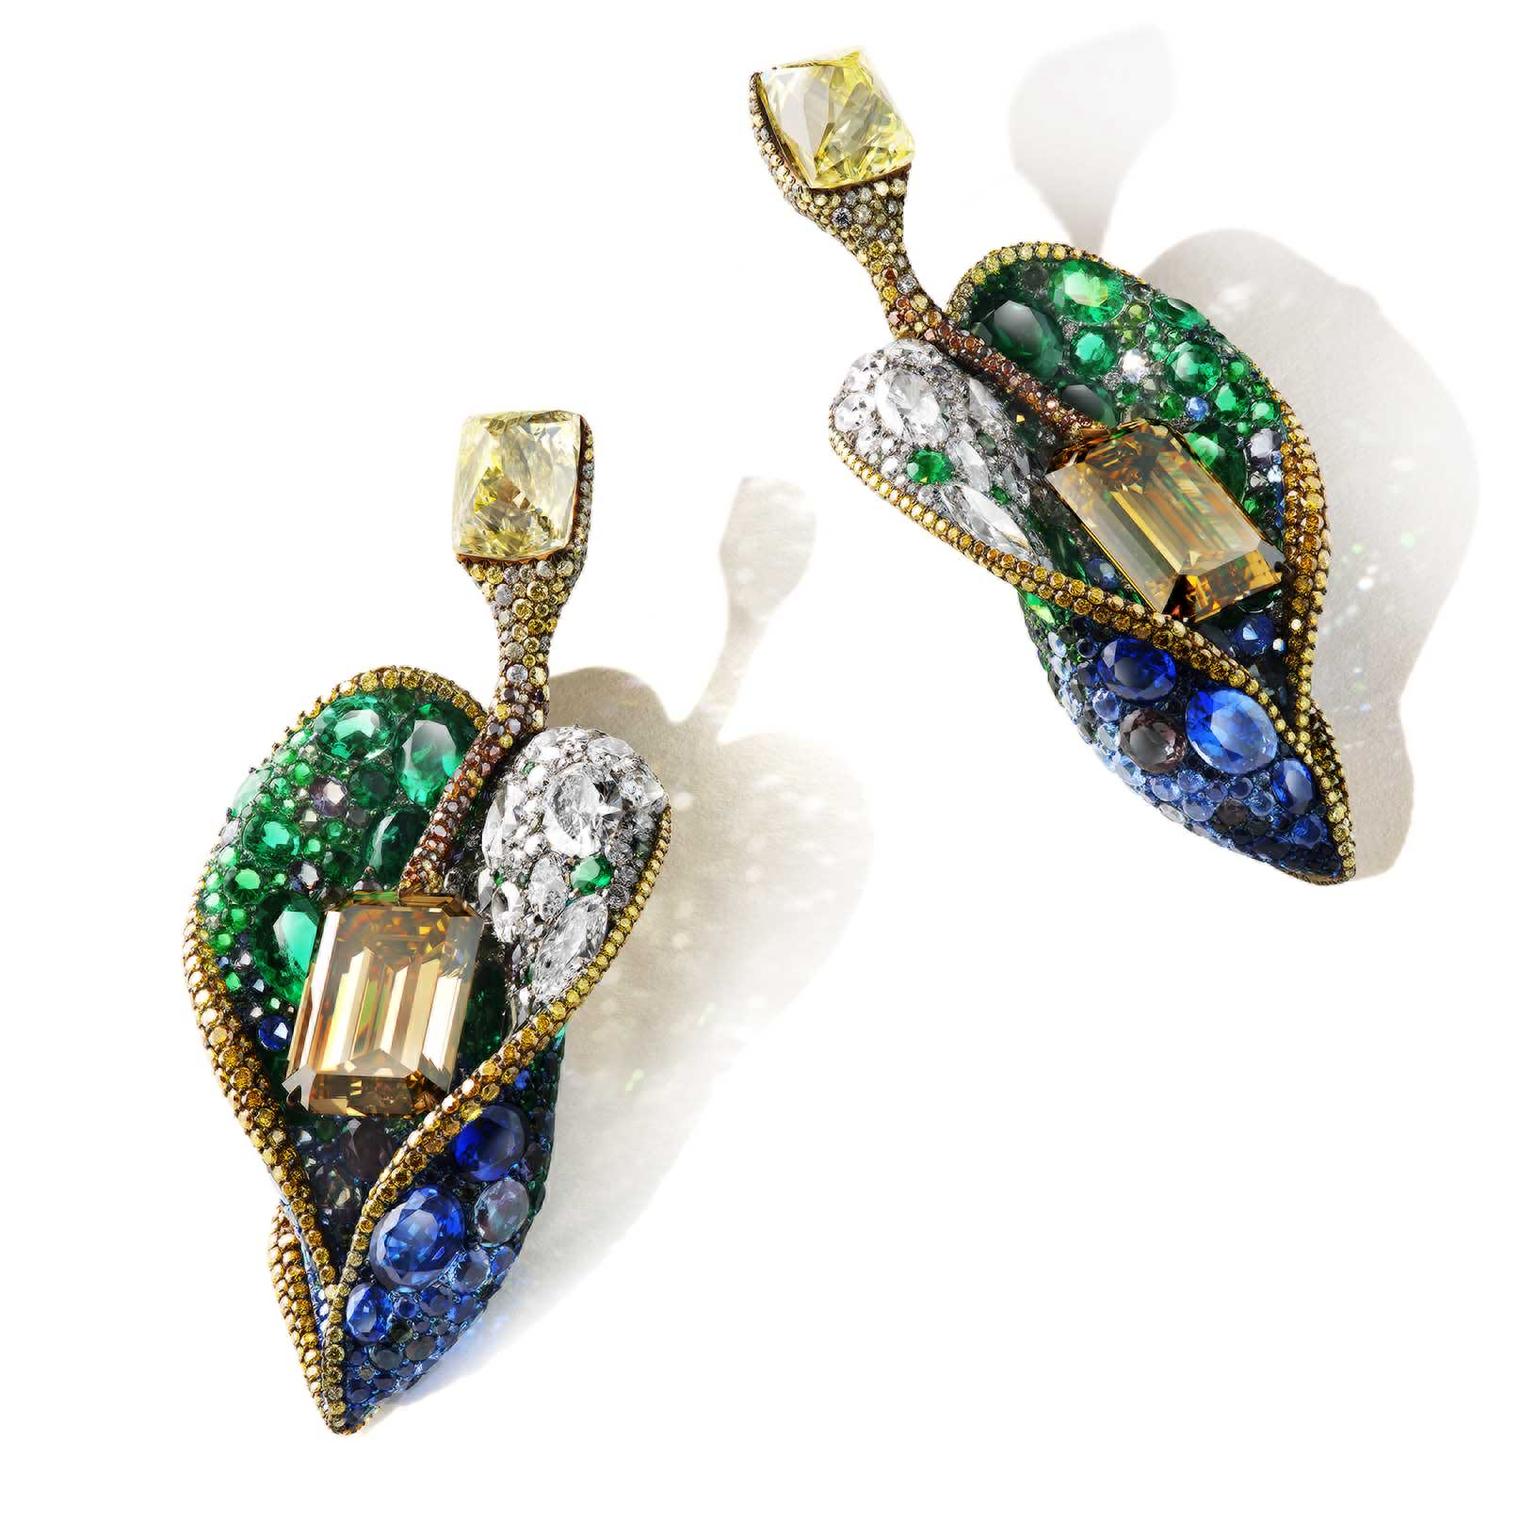 Francesca Amfitheatrof on Spirit, her new high jewellery collection for  Louis Vuitton - Something About Rocks